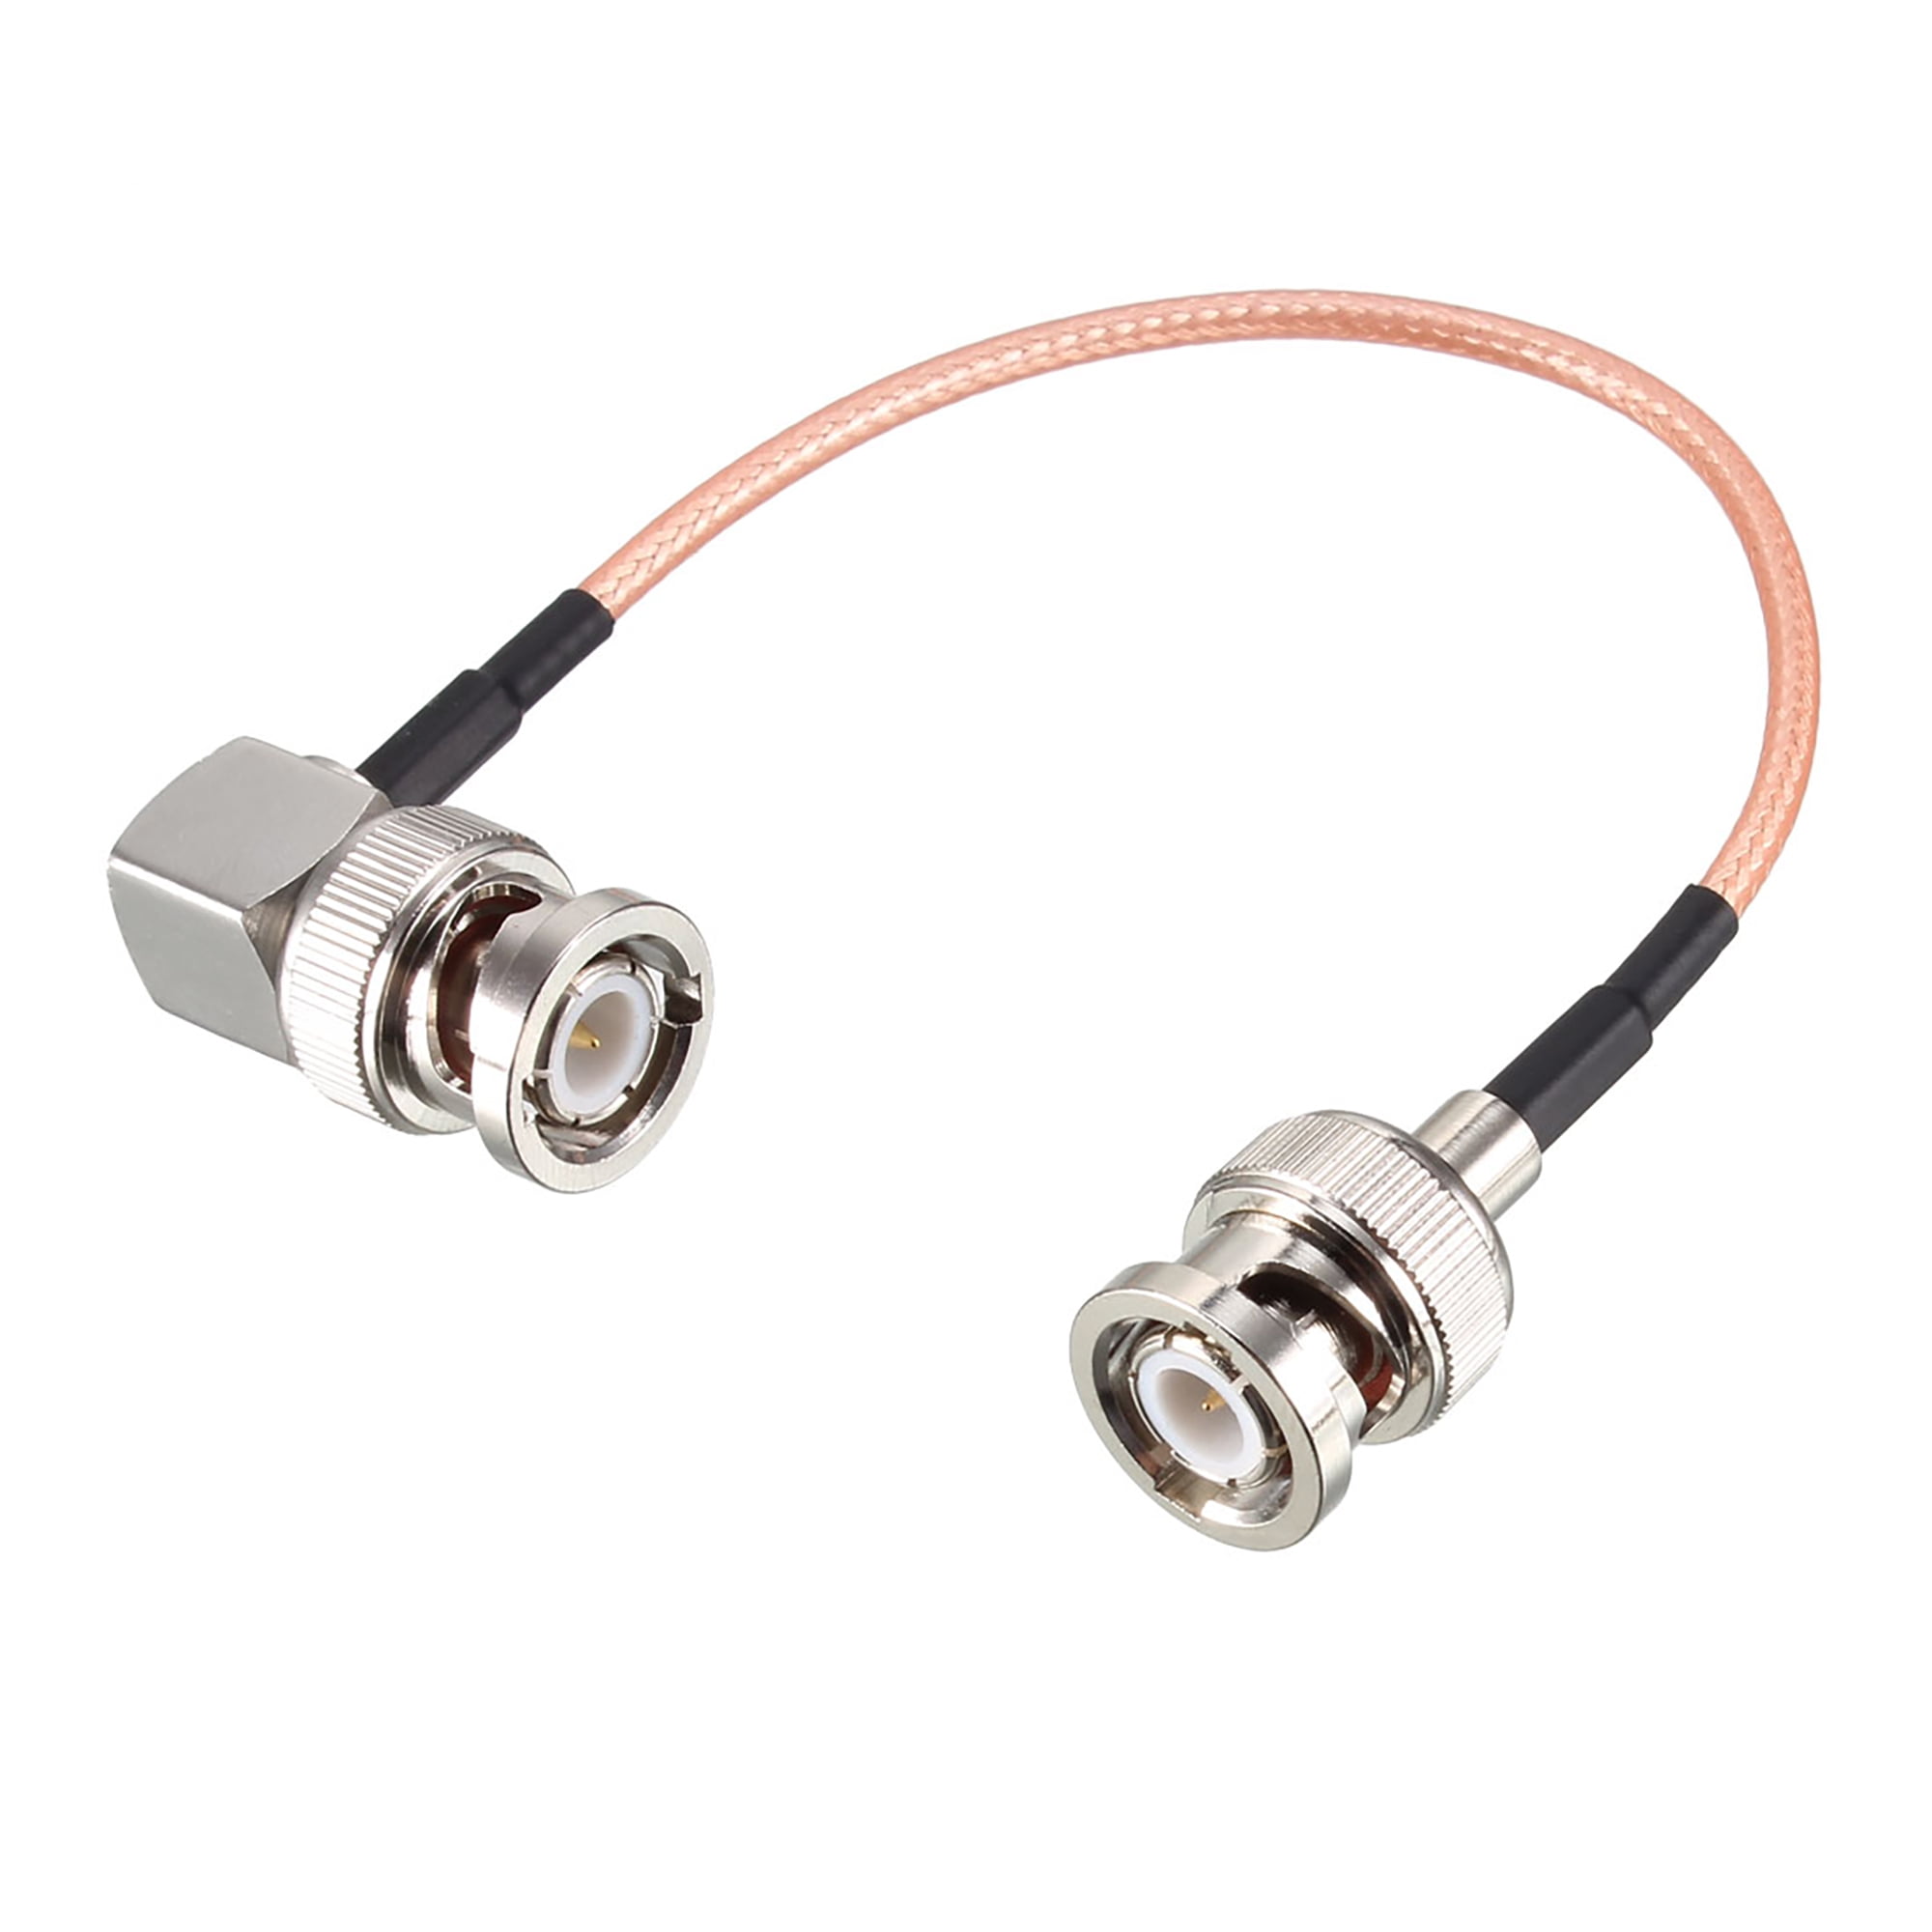 SMA Male to BNC Male Angle RG316 Coaxial Cable High Quality USA Pick Your Length 